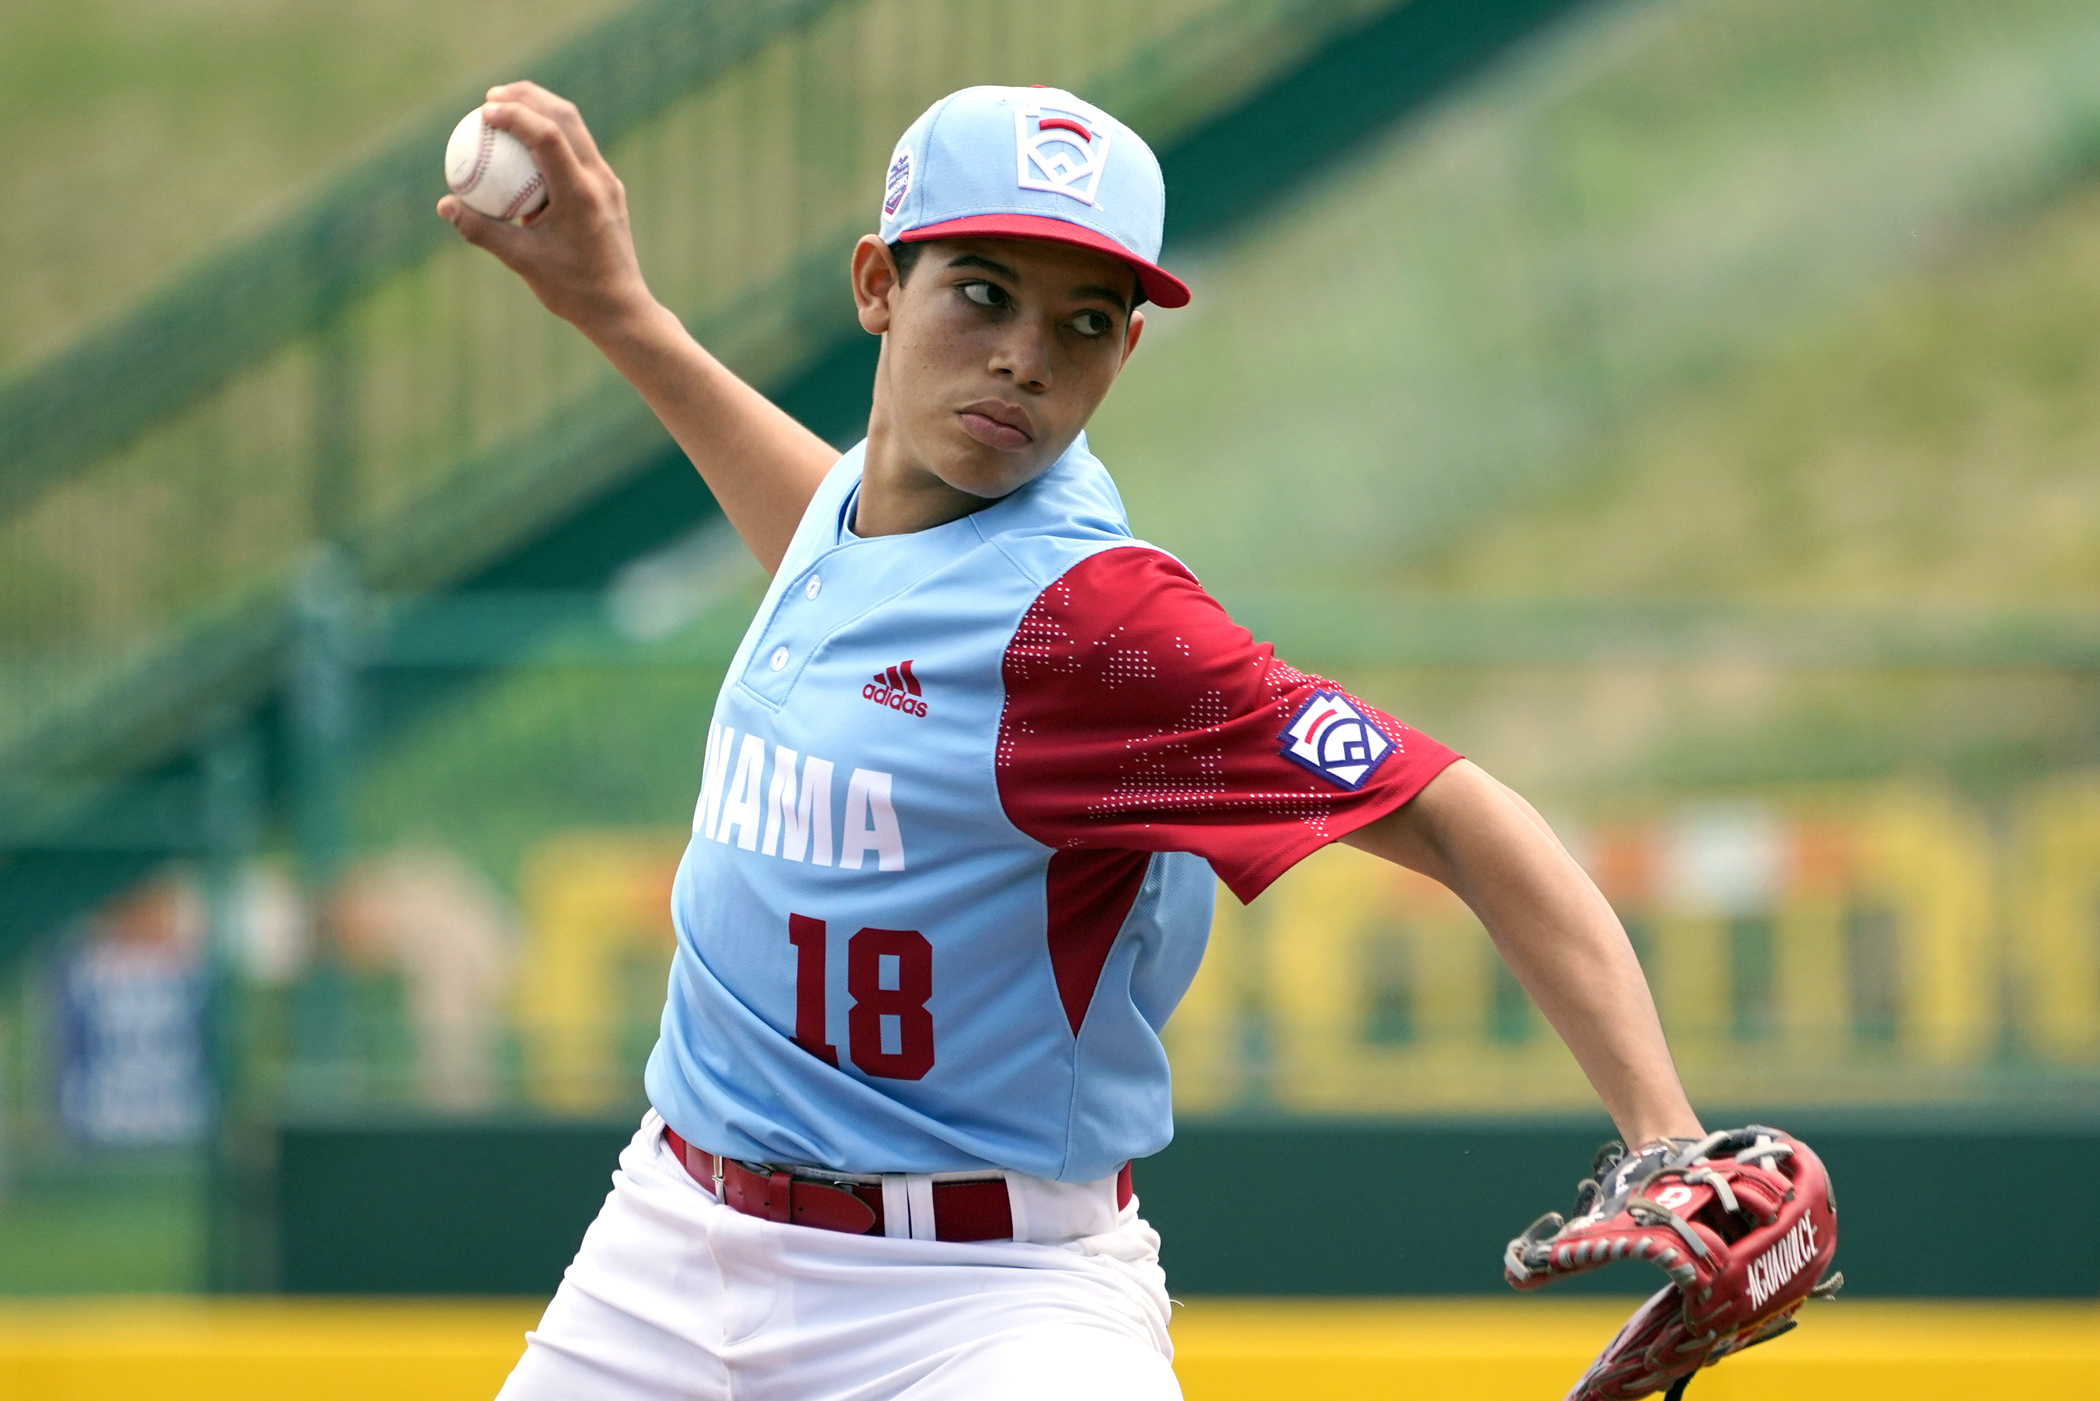 Pearland continues Little League World Series journey Monday night